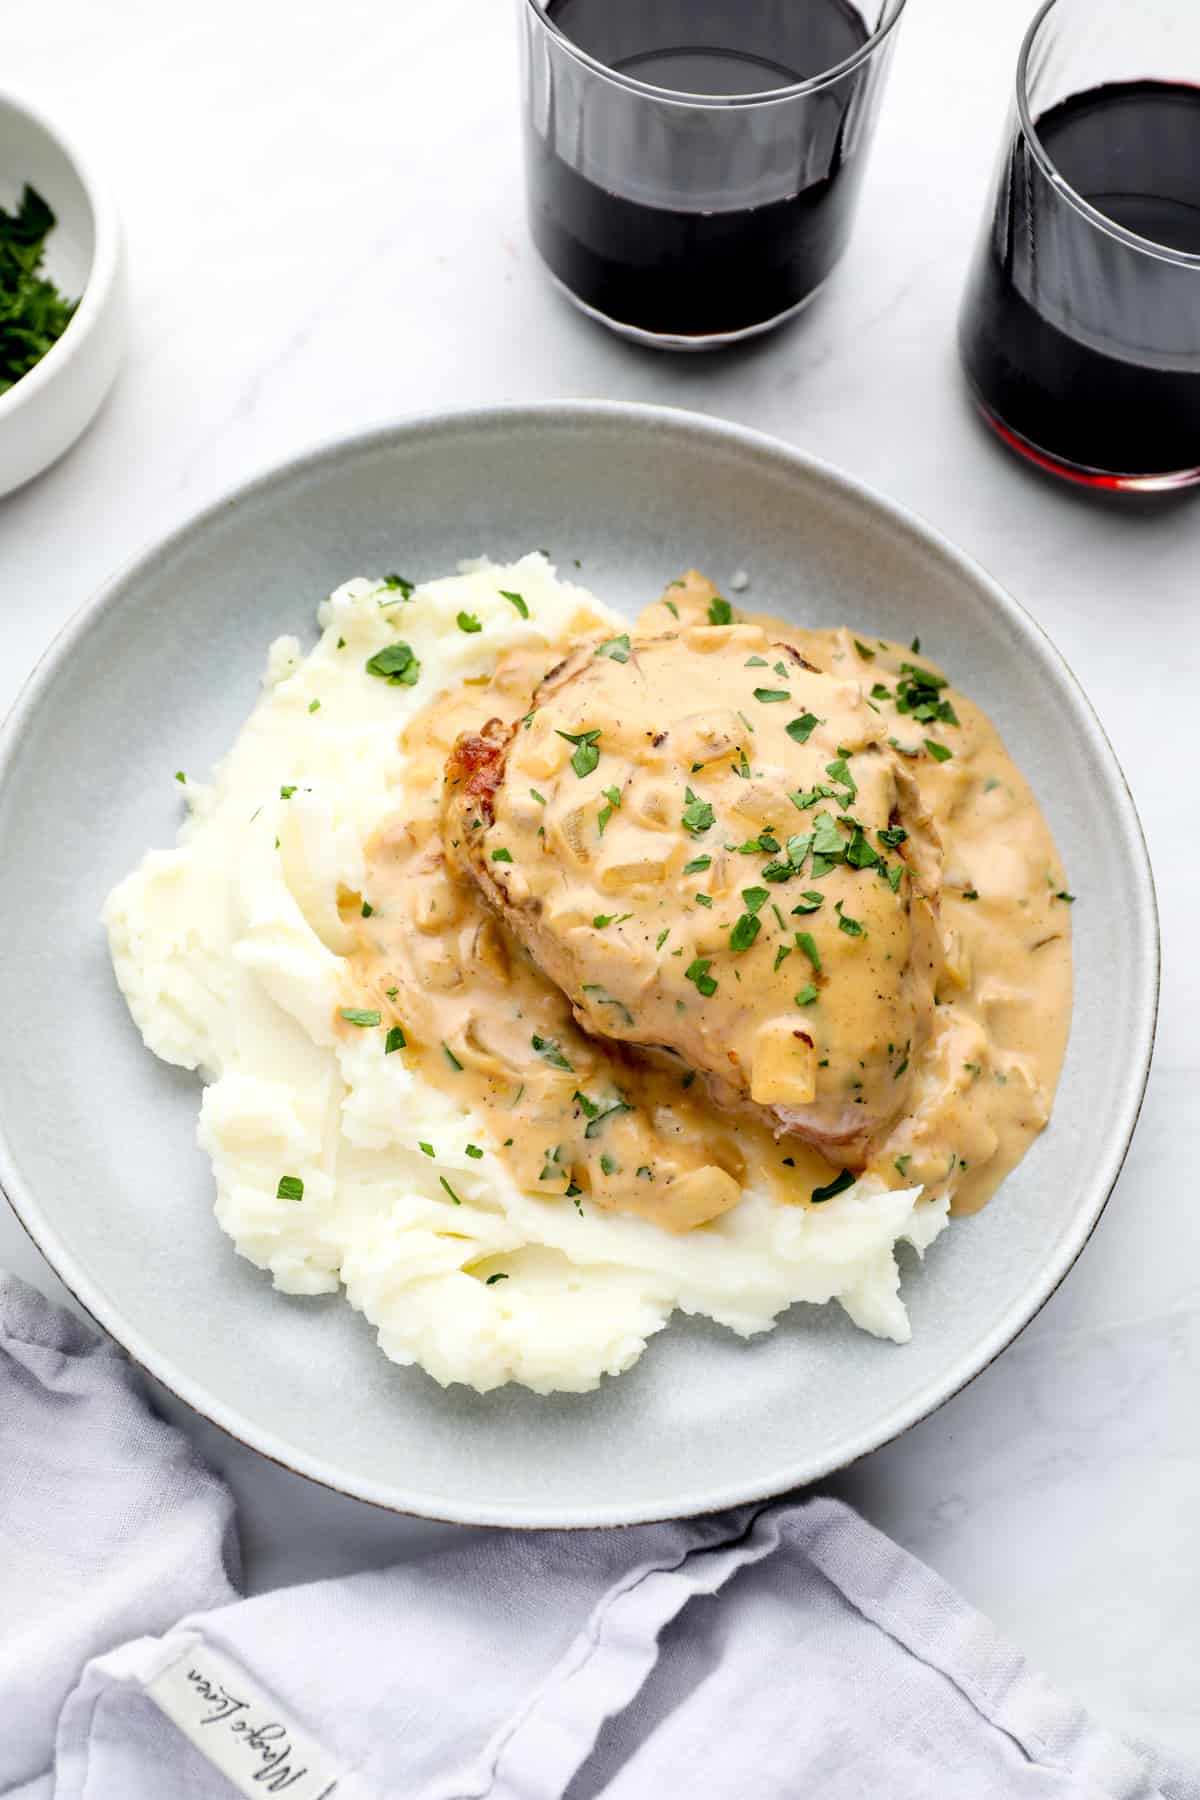 gravy smothered pork chops served on a dish with mashed potatoes and glasses of wine